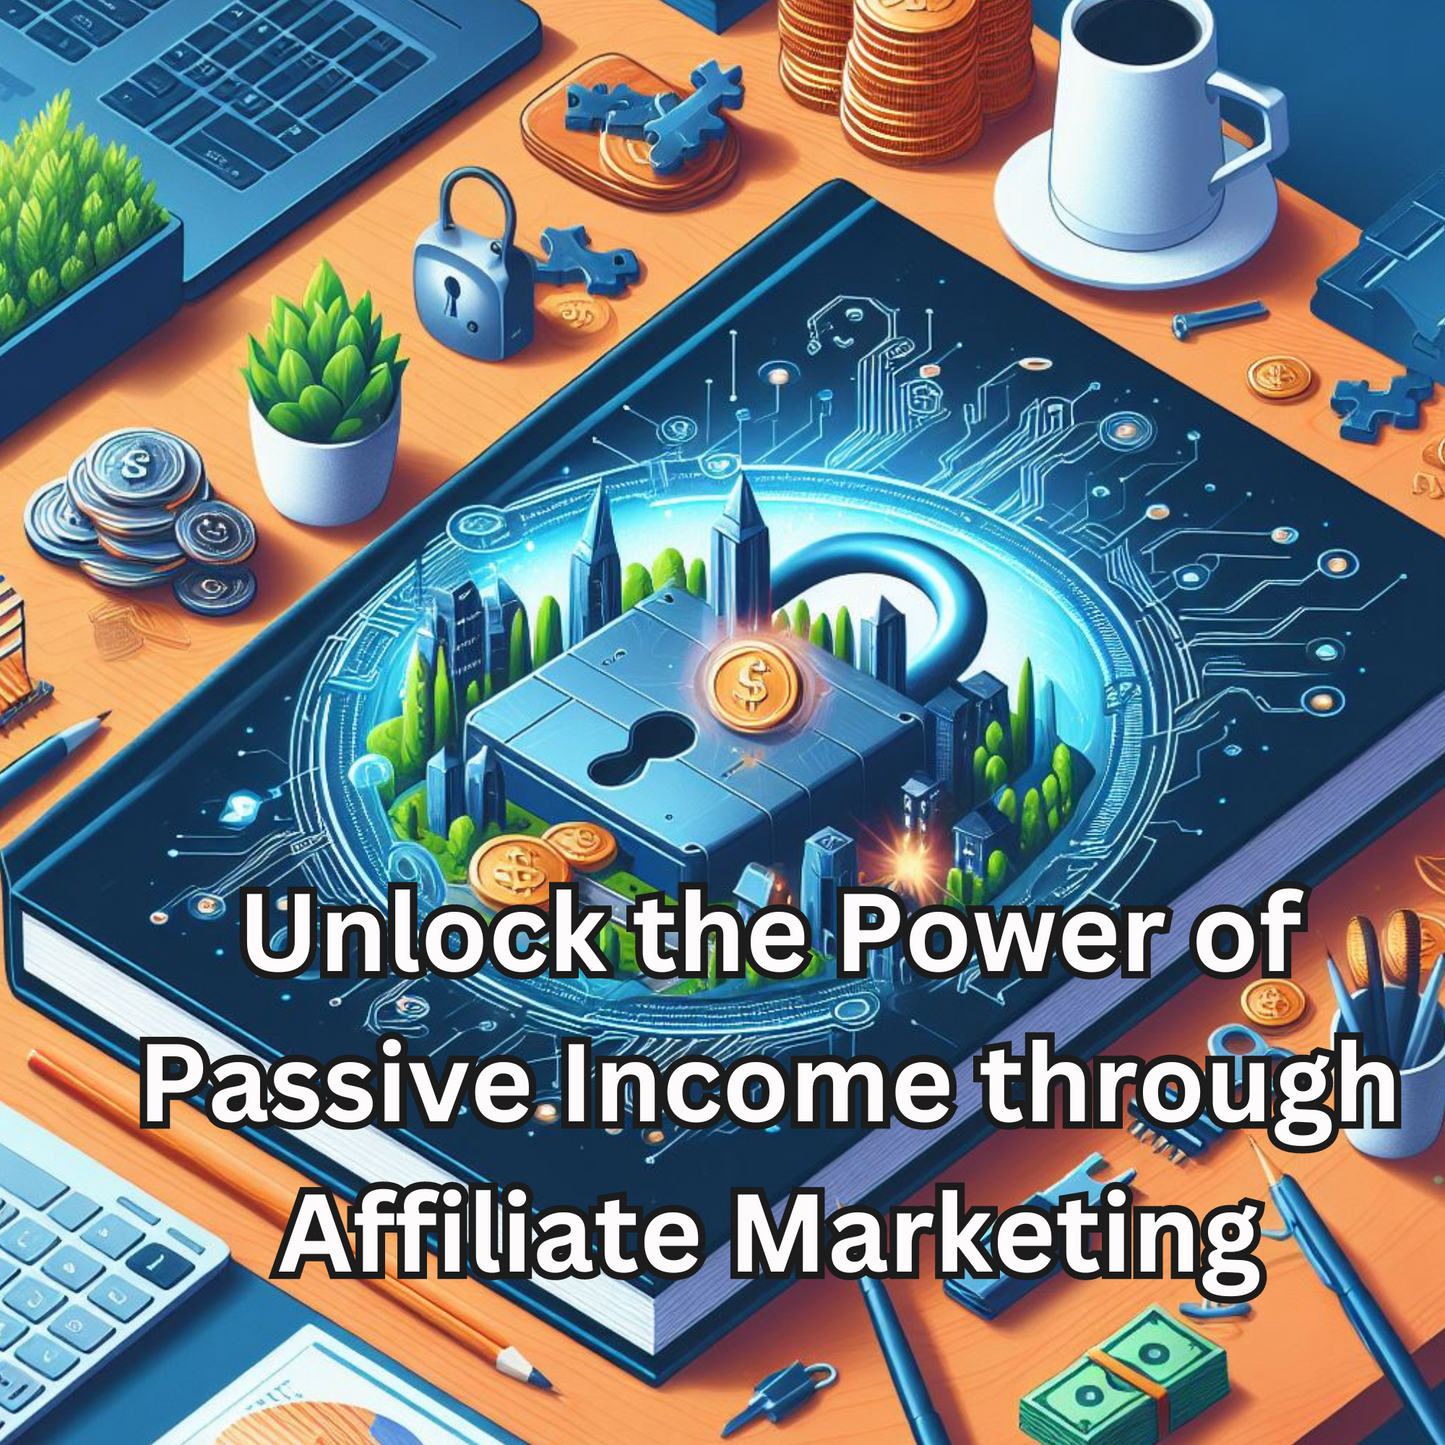 Unlock the Power of Passive Income through Affiliate Marketing